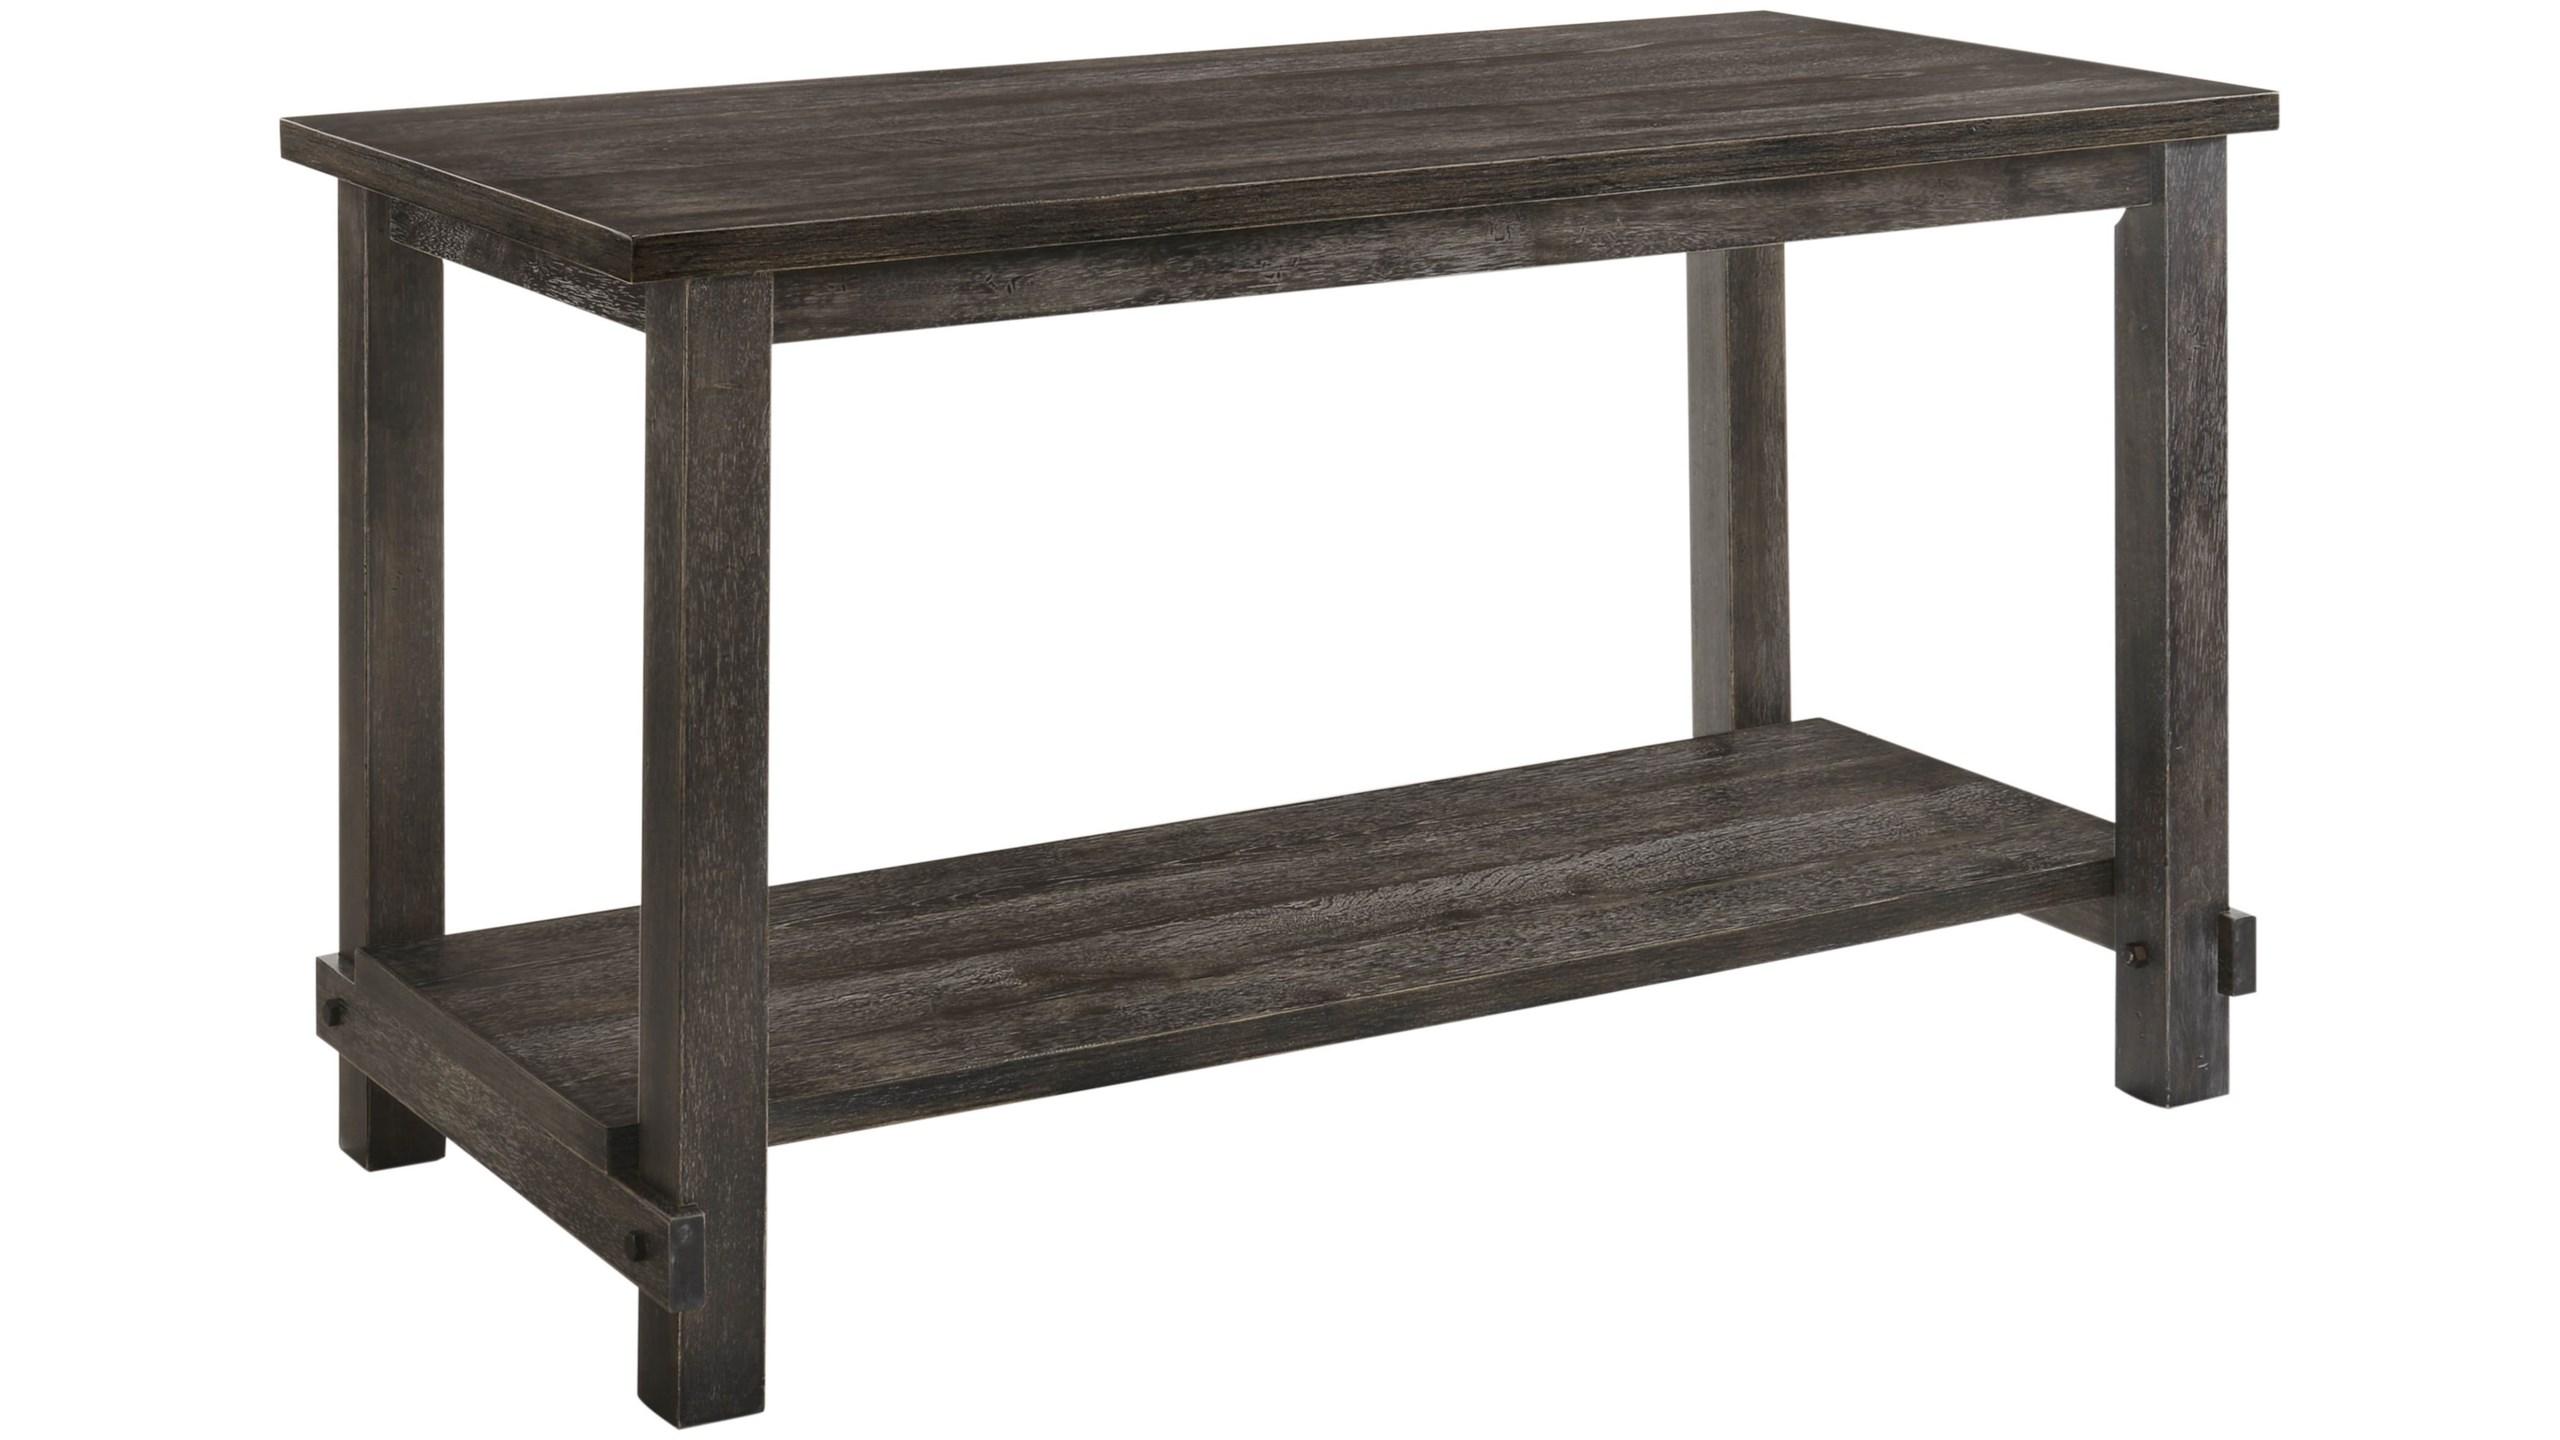 Classic, Traditional, Farmhouse Counter Height Table Martha II 73830 in Gray 